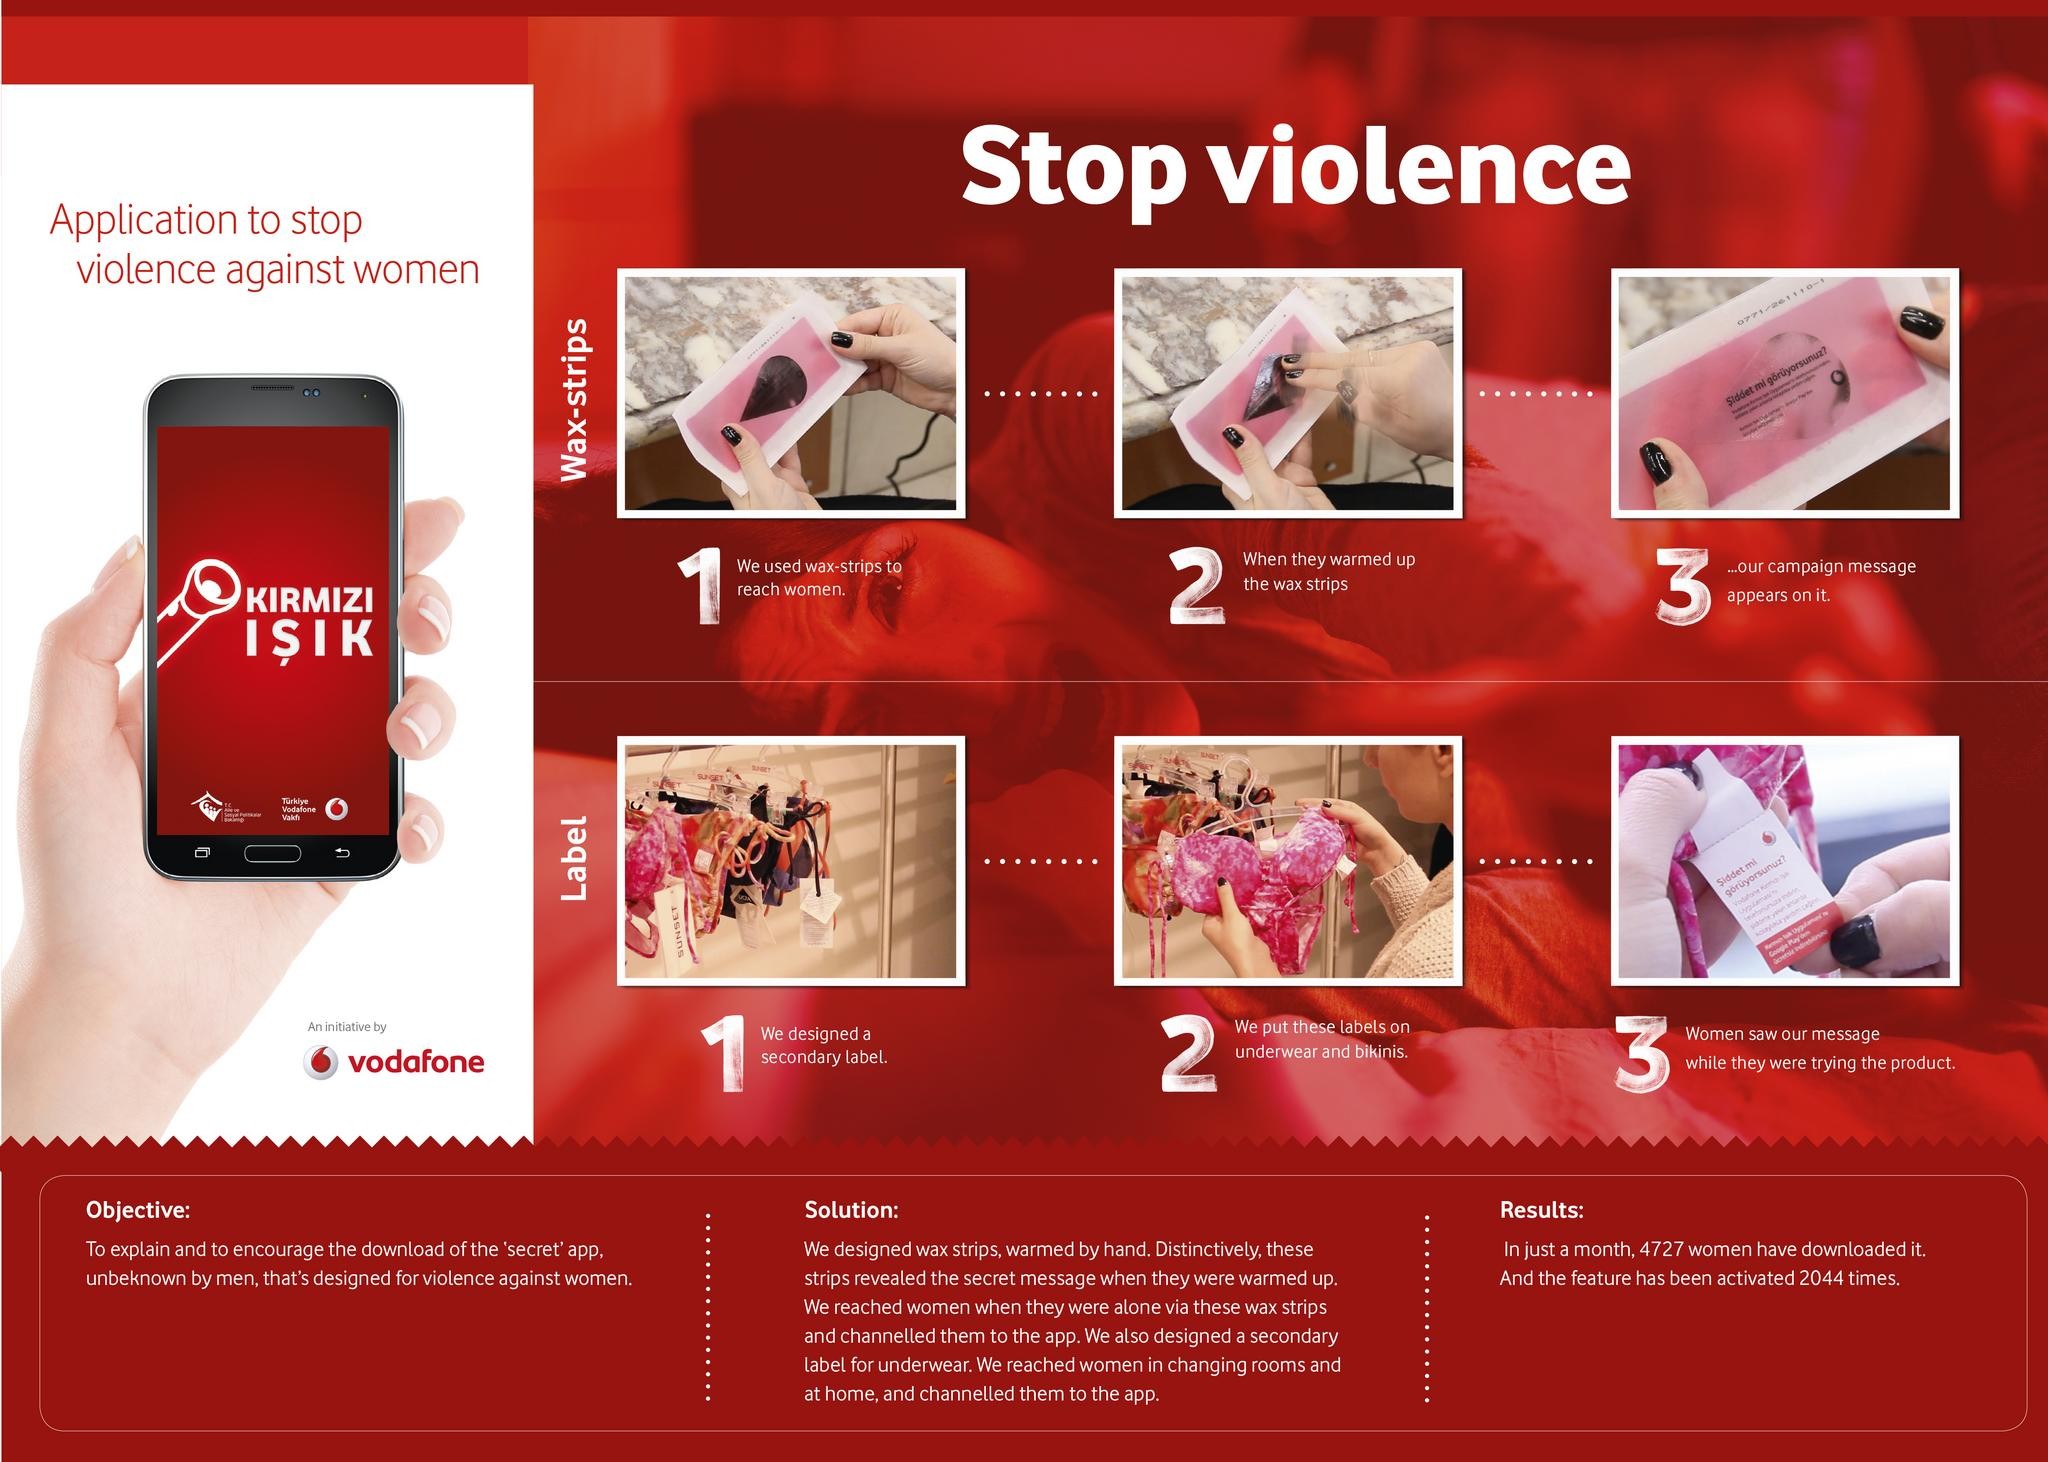 VODAFONE RED LIGHT APPLICATION (TO STOP VIOLENCE AGAINST WOMEN)